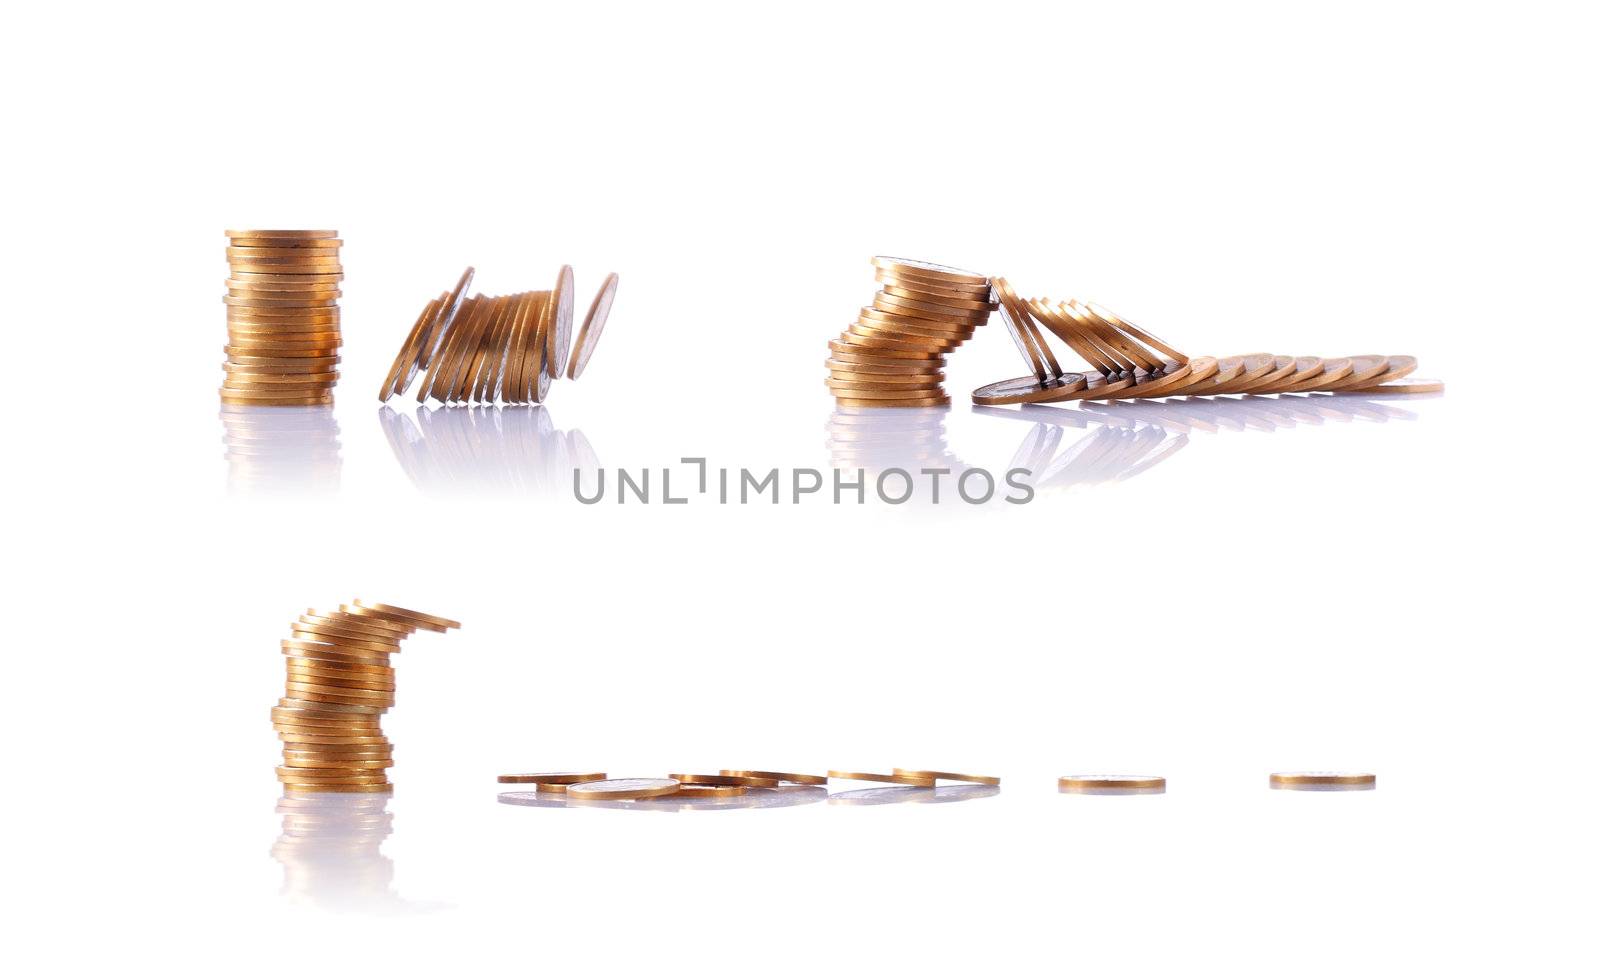 stack of coins isolated on white background